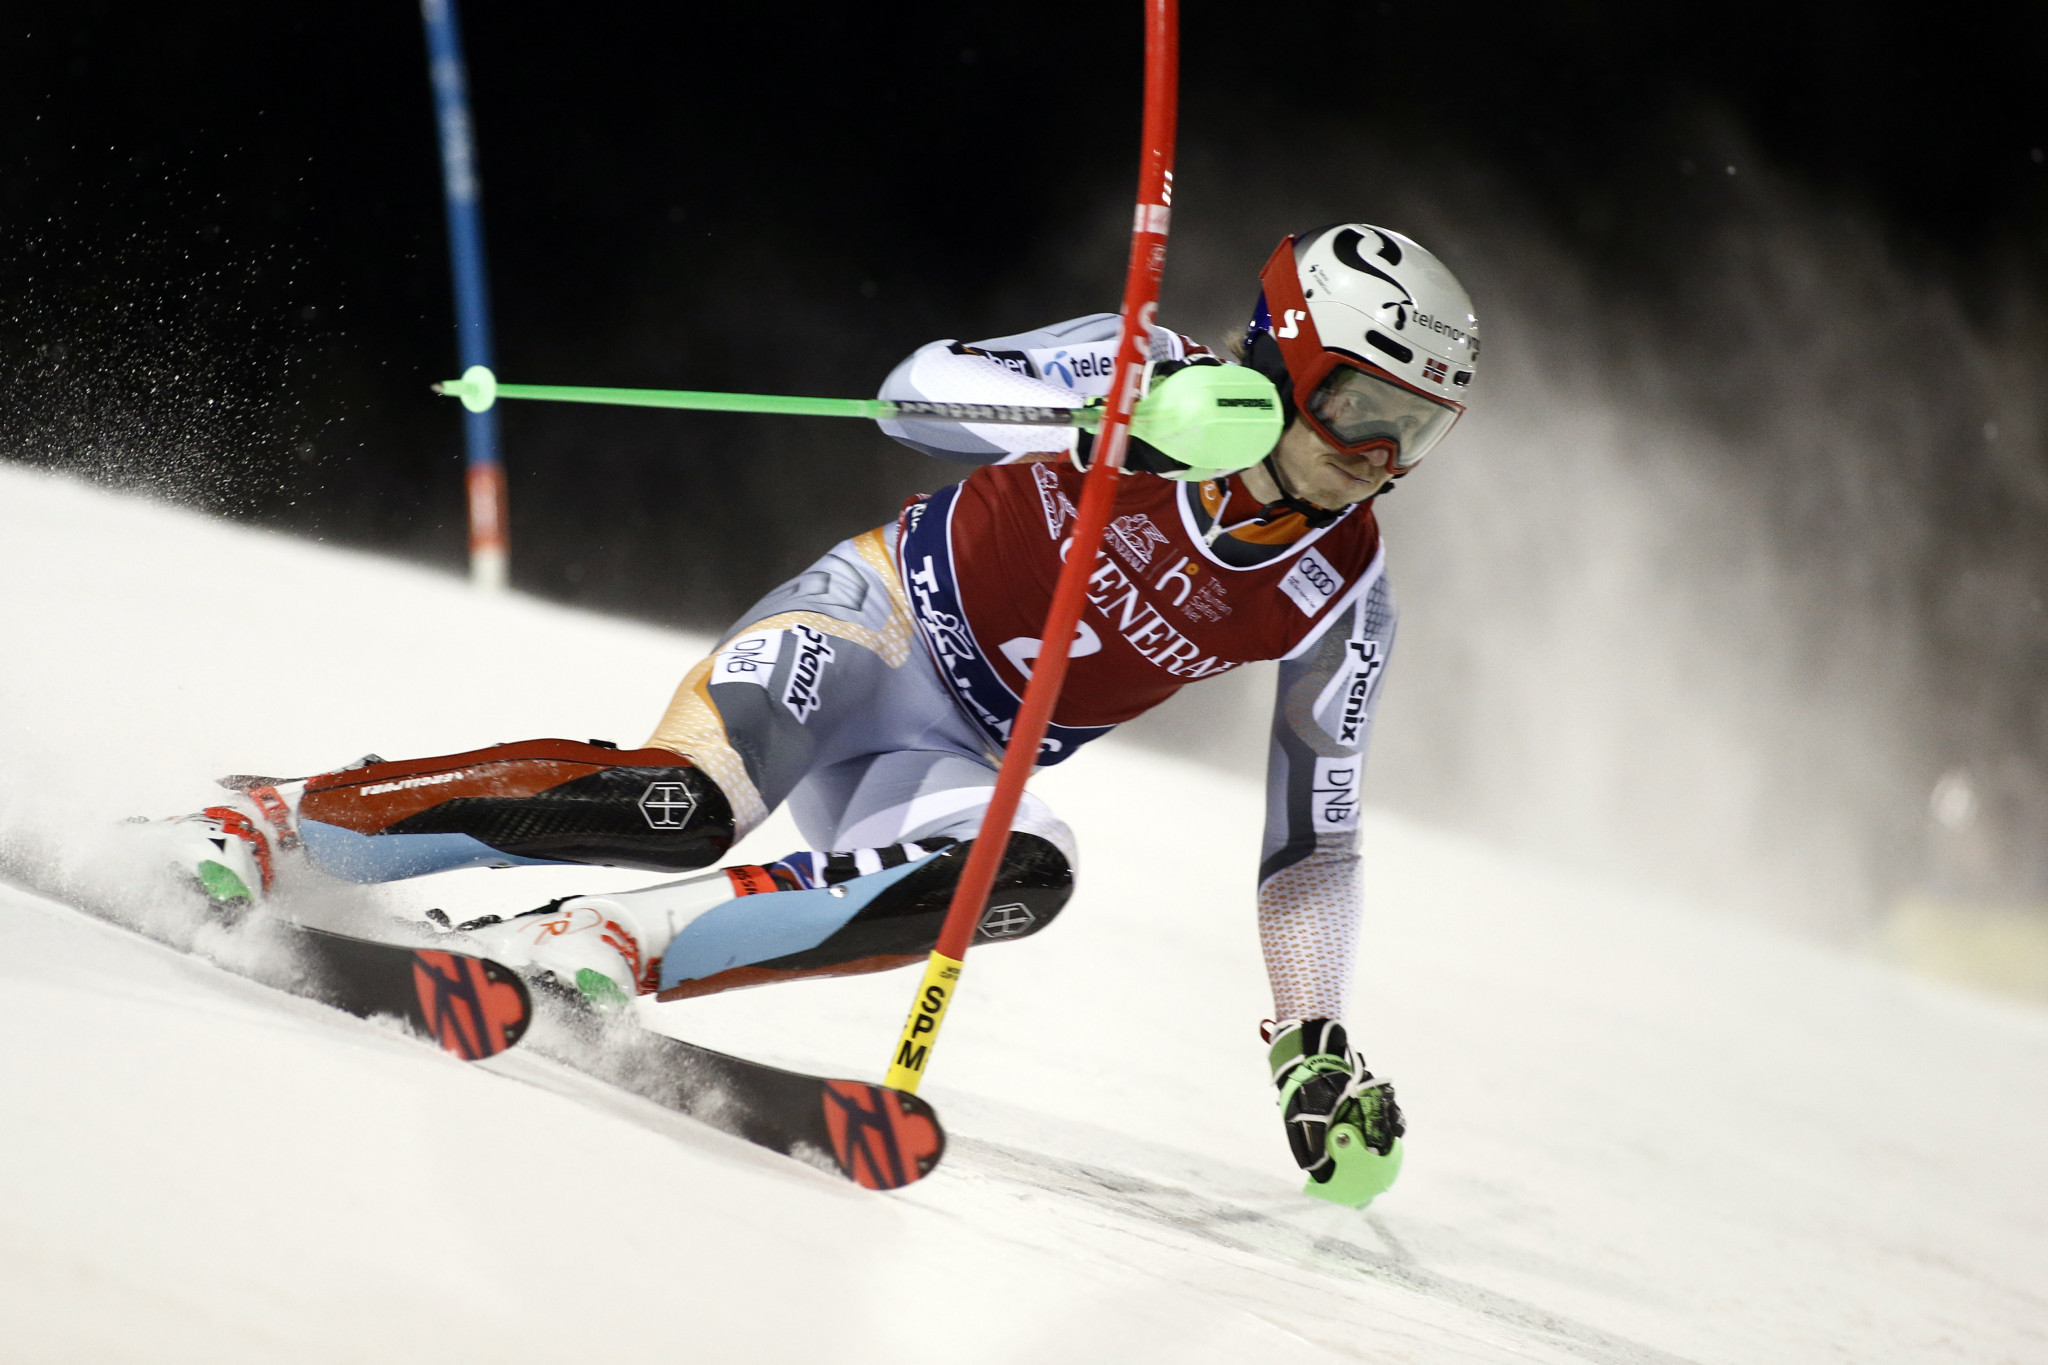 Norway's Henrik Kristoffersen's second-place finish has moved him to the top of the FIS Alpine Skiing World Cup men's slalom standings ©Getty Images